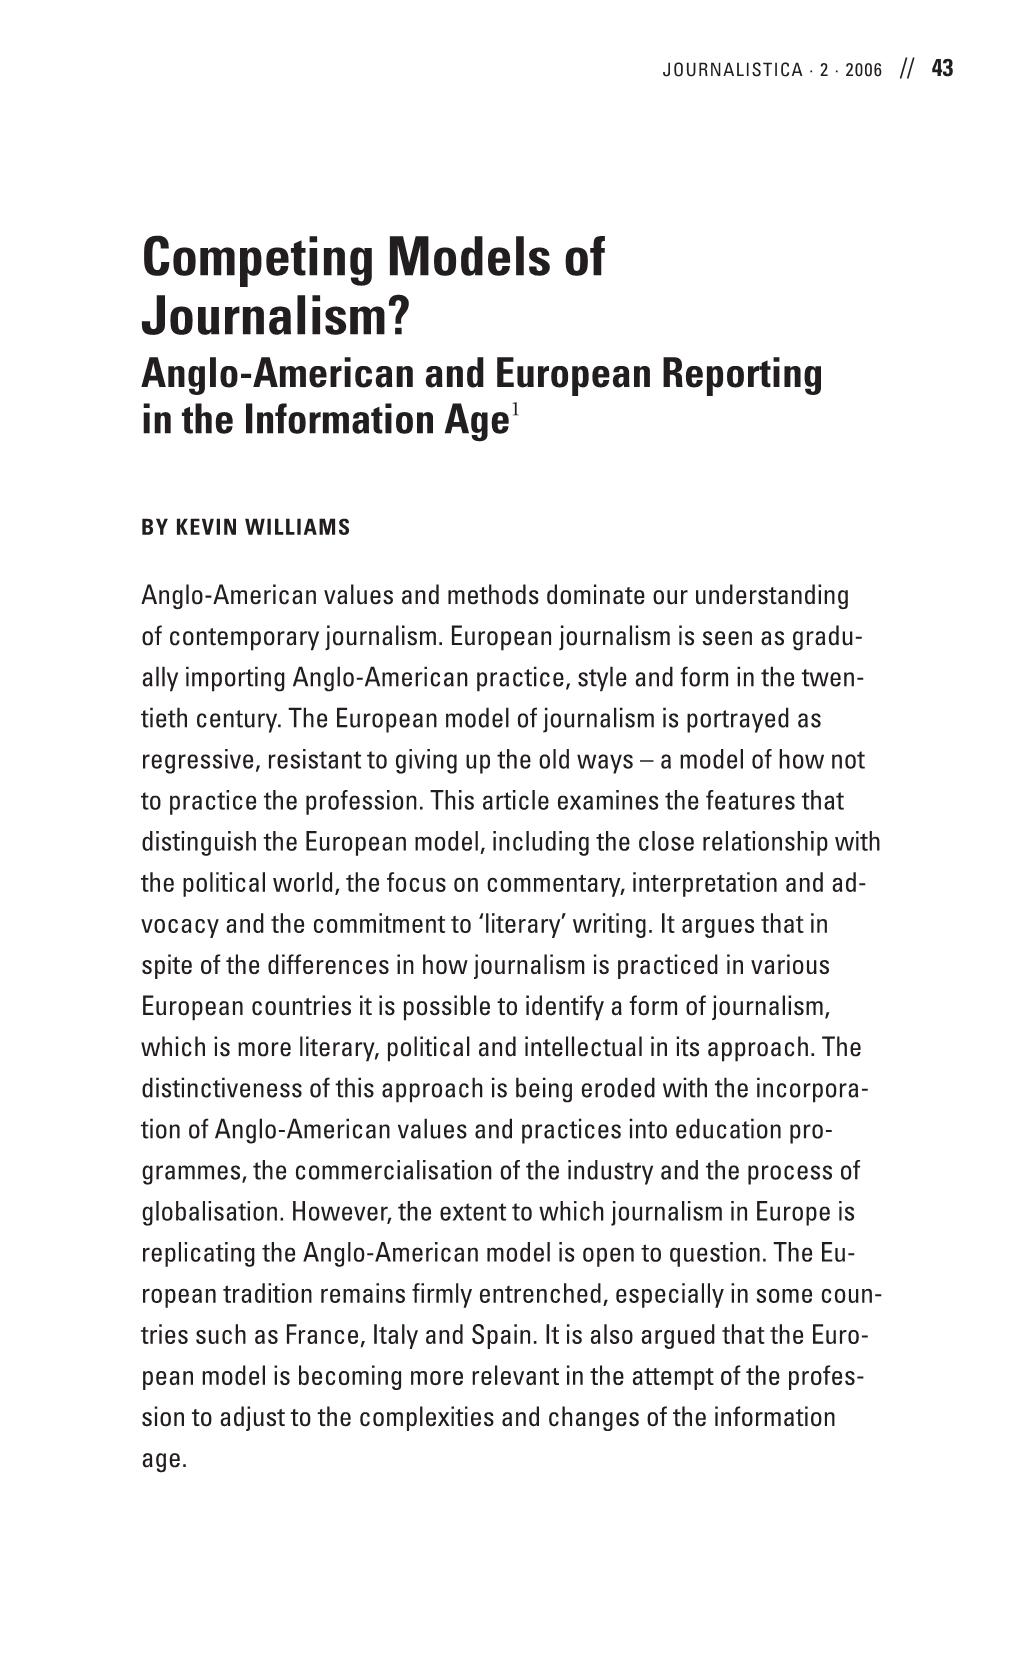 Competing Models of Journalism? Anglo-American and European Reporting in the Information Age1